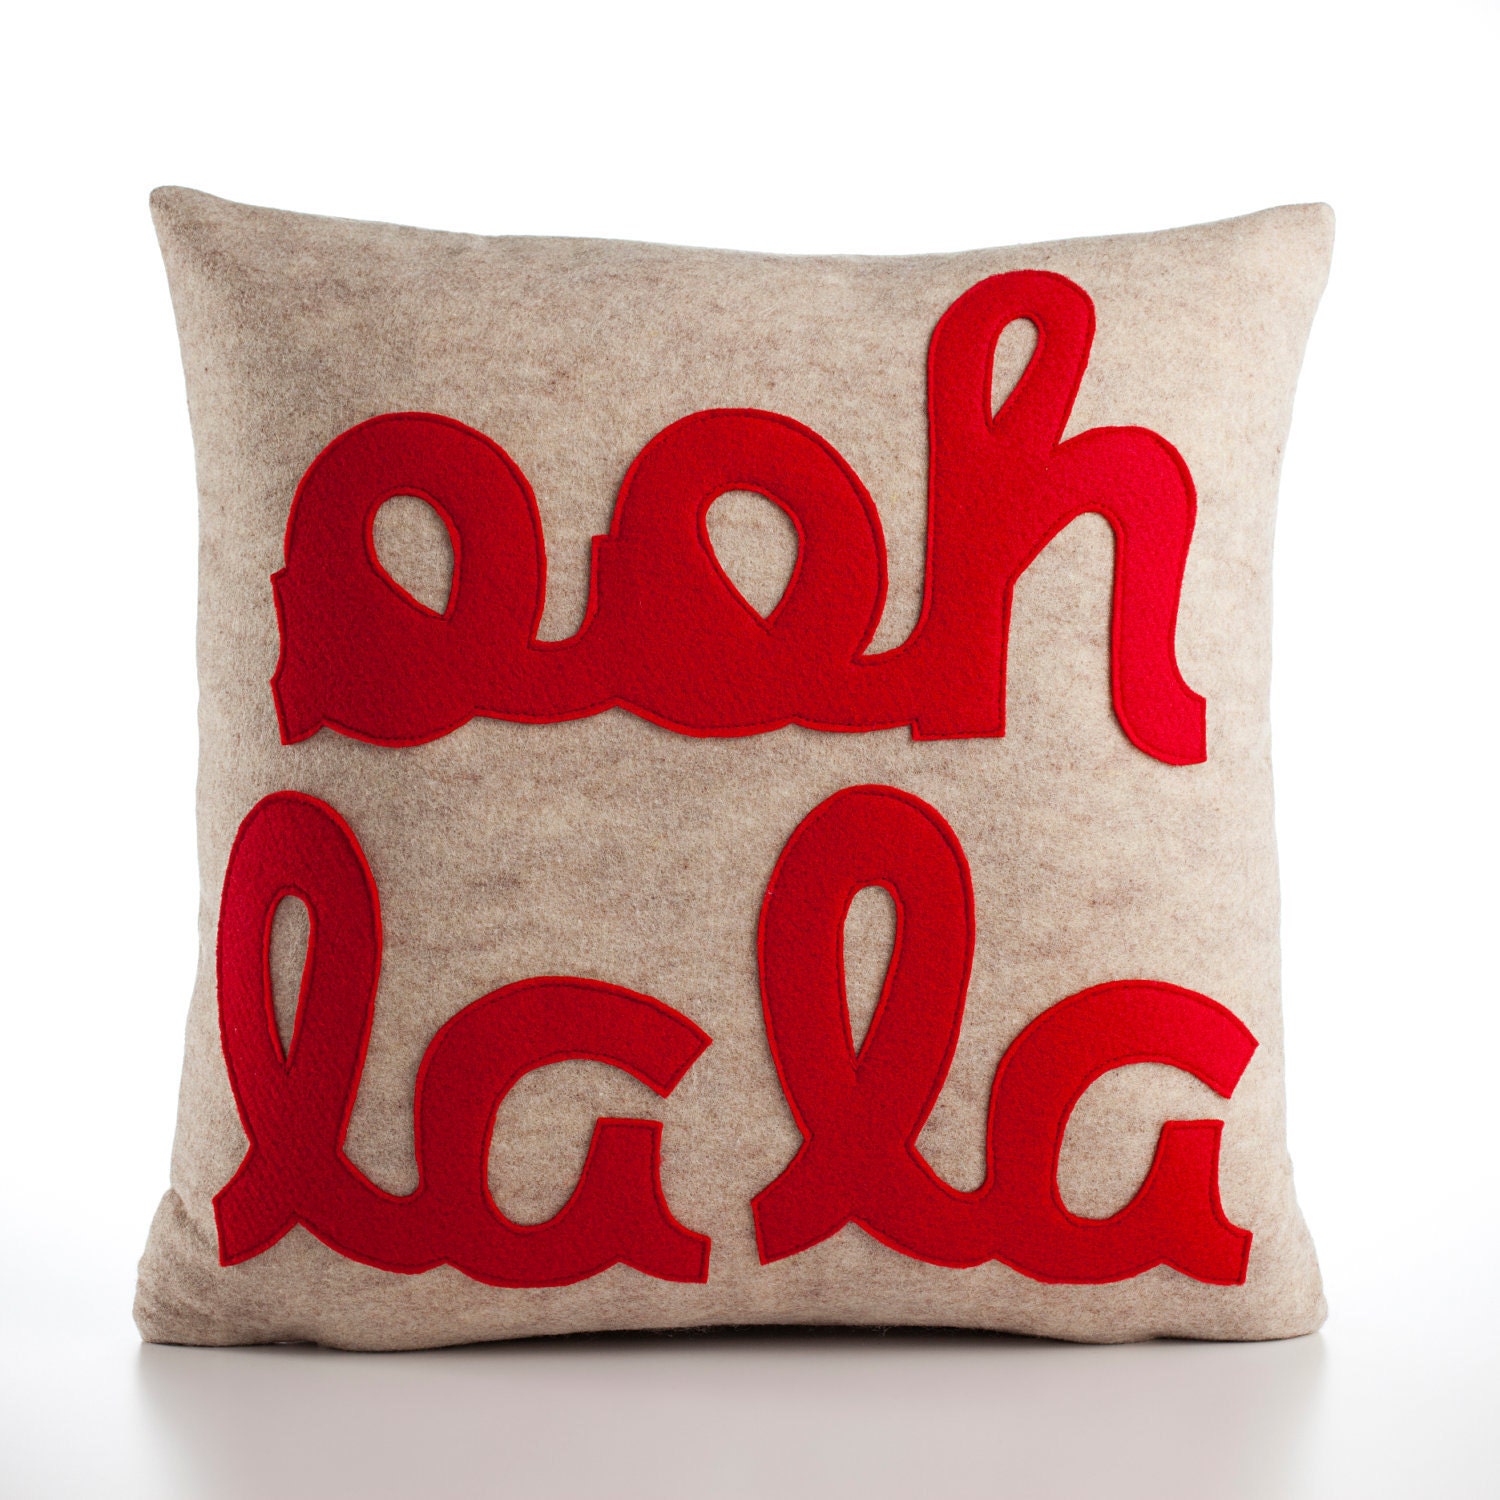 Ooh la la 22x22inch pillow recycled felt applique pillow - oatmeal and red